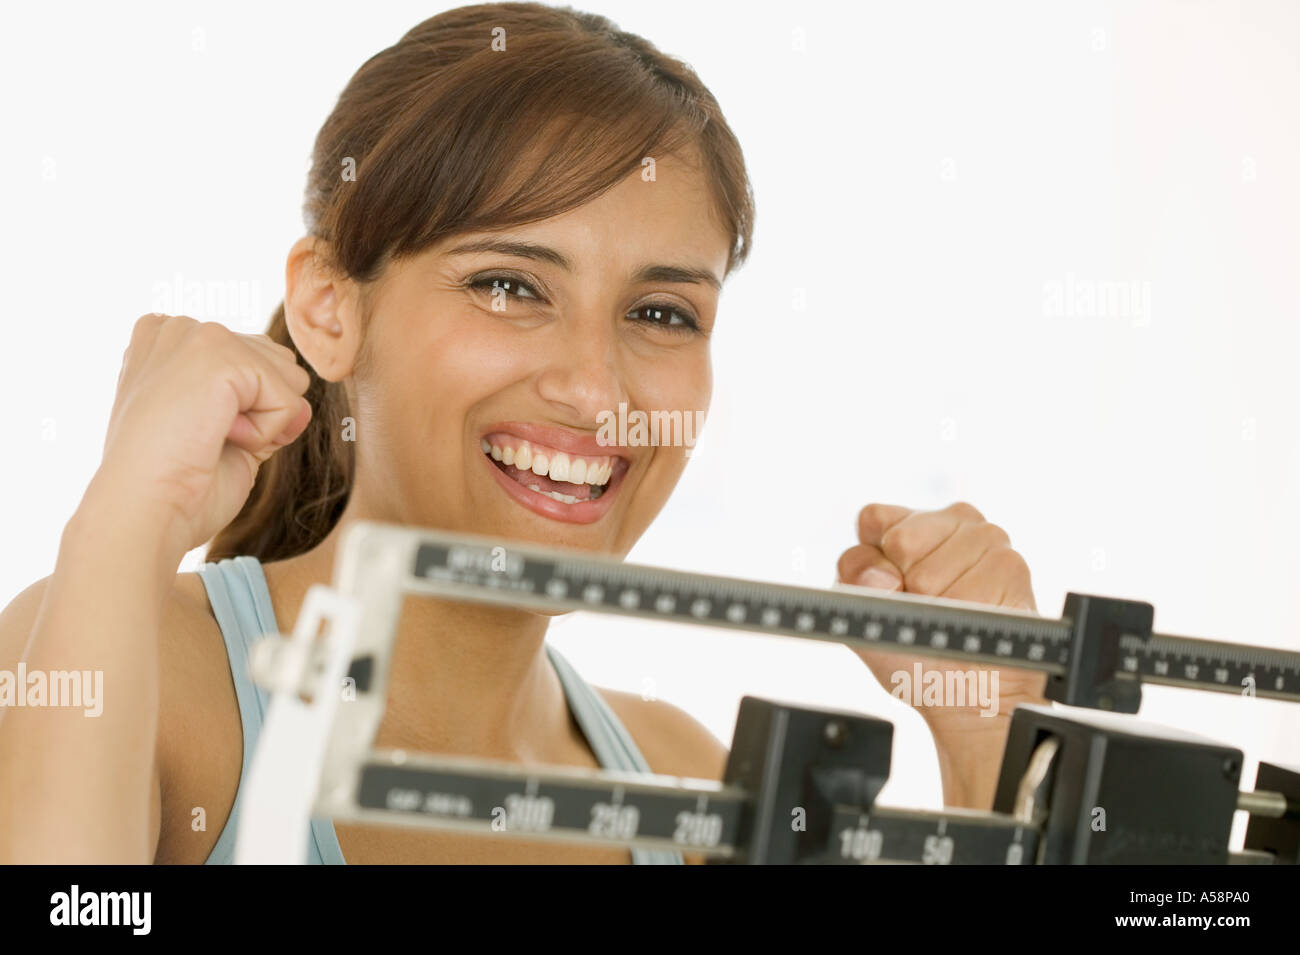 Portrait of woman weighing on scale Stock Photo